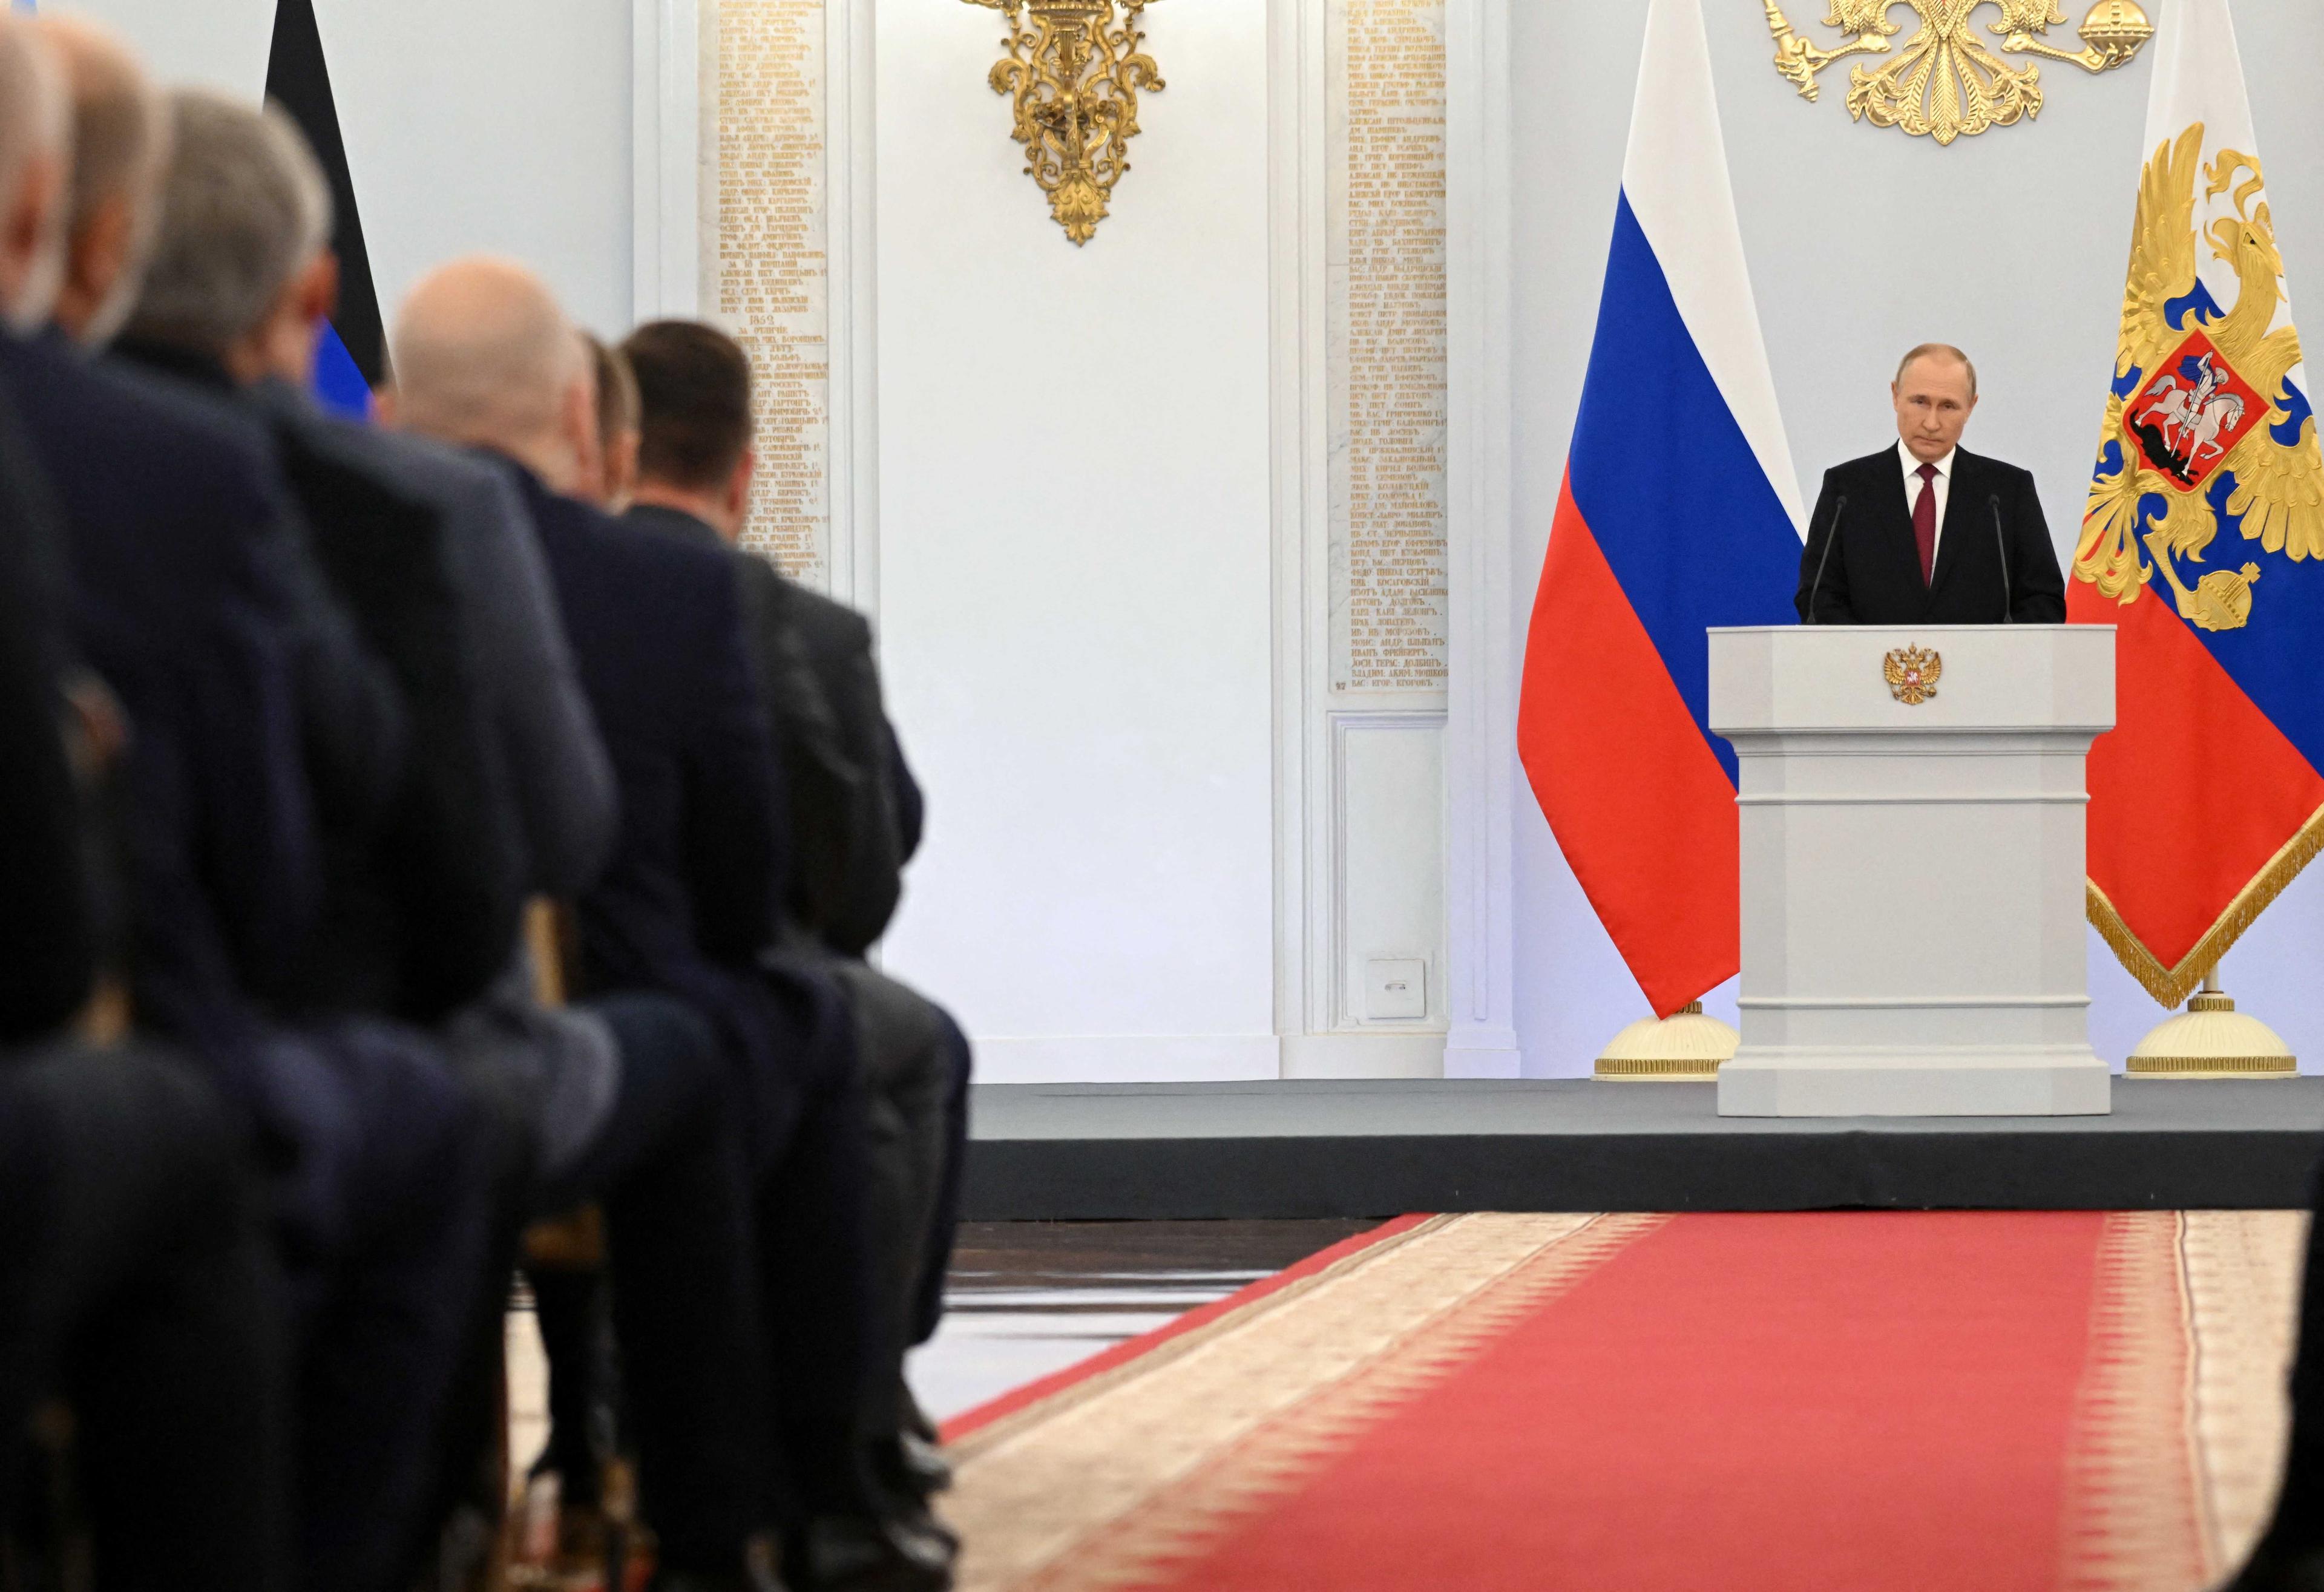 Russian President Vladimir Putin attends a ceremony to declare the annexation of the Russian-controlled territories, in the Georgievsky Hall of the Great Kremlin Palace in Moscow, Russia, Sept 30. Photo: Reuters